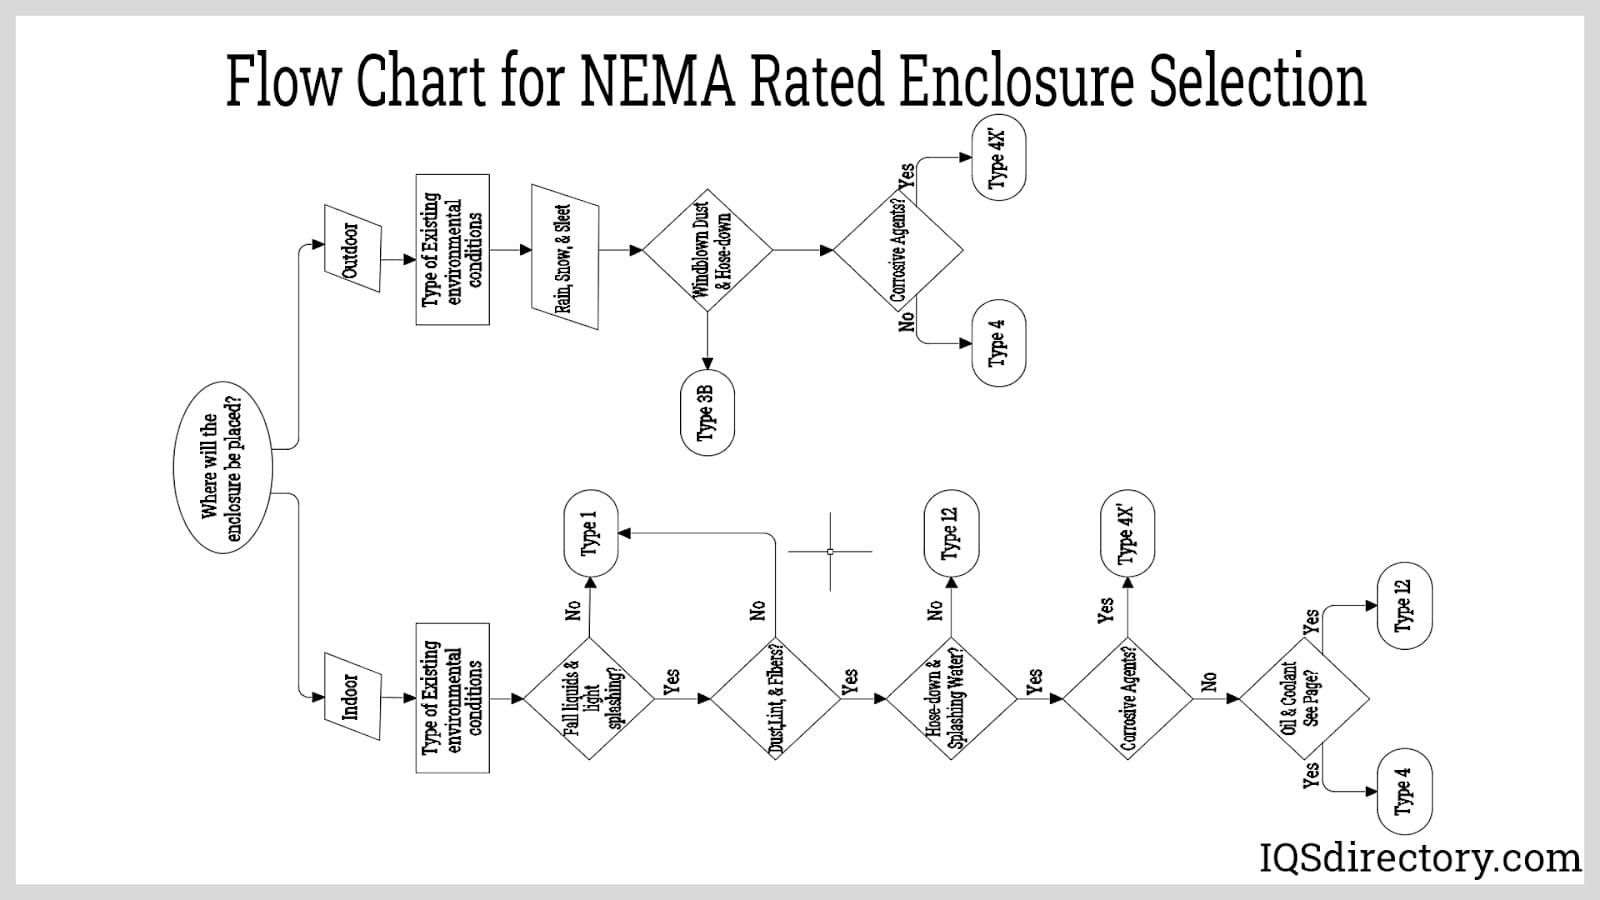 Flow Chart for NEMA Rated Enclosure Selection